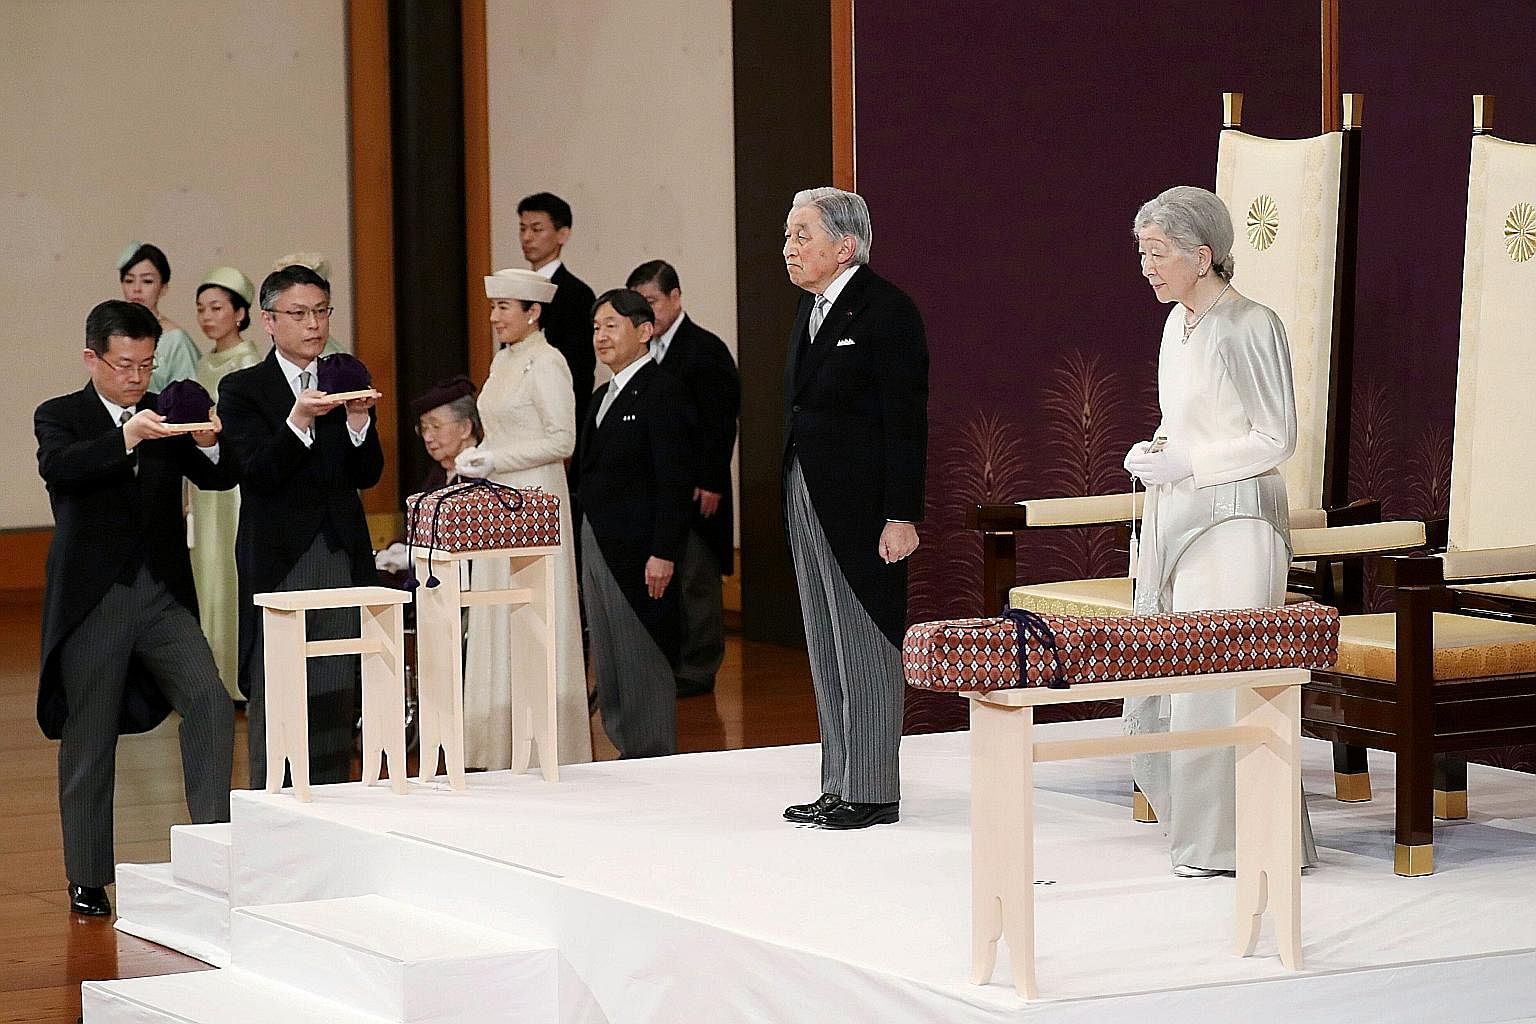 Japan's Emperor Akihito and Empress Michiko, together with Crown Prince Naruhito and Crown Princess Masako, attending the abdication ceremony at the State Room in the Imperial Palace in Tokyo yesterday. Emperor Akihito, 85, in his final remarks as hi